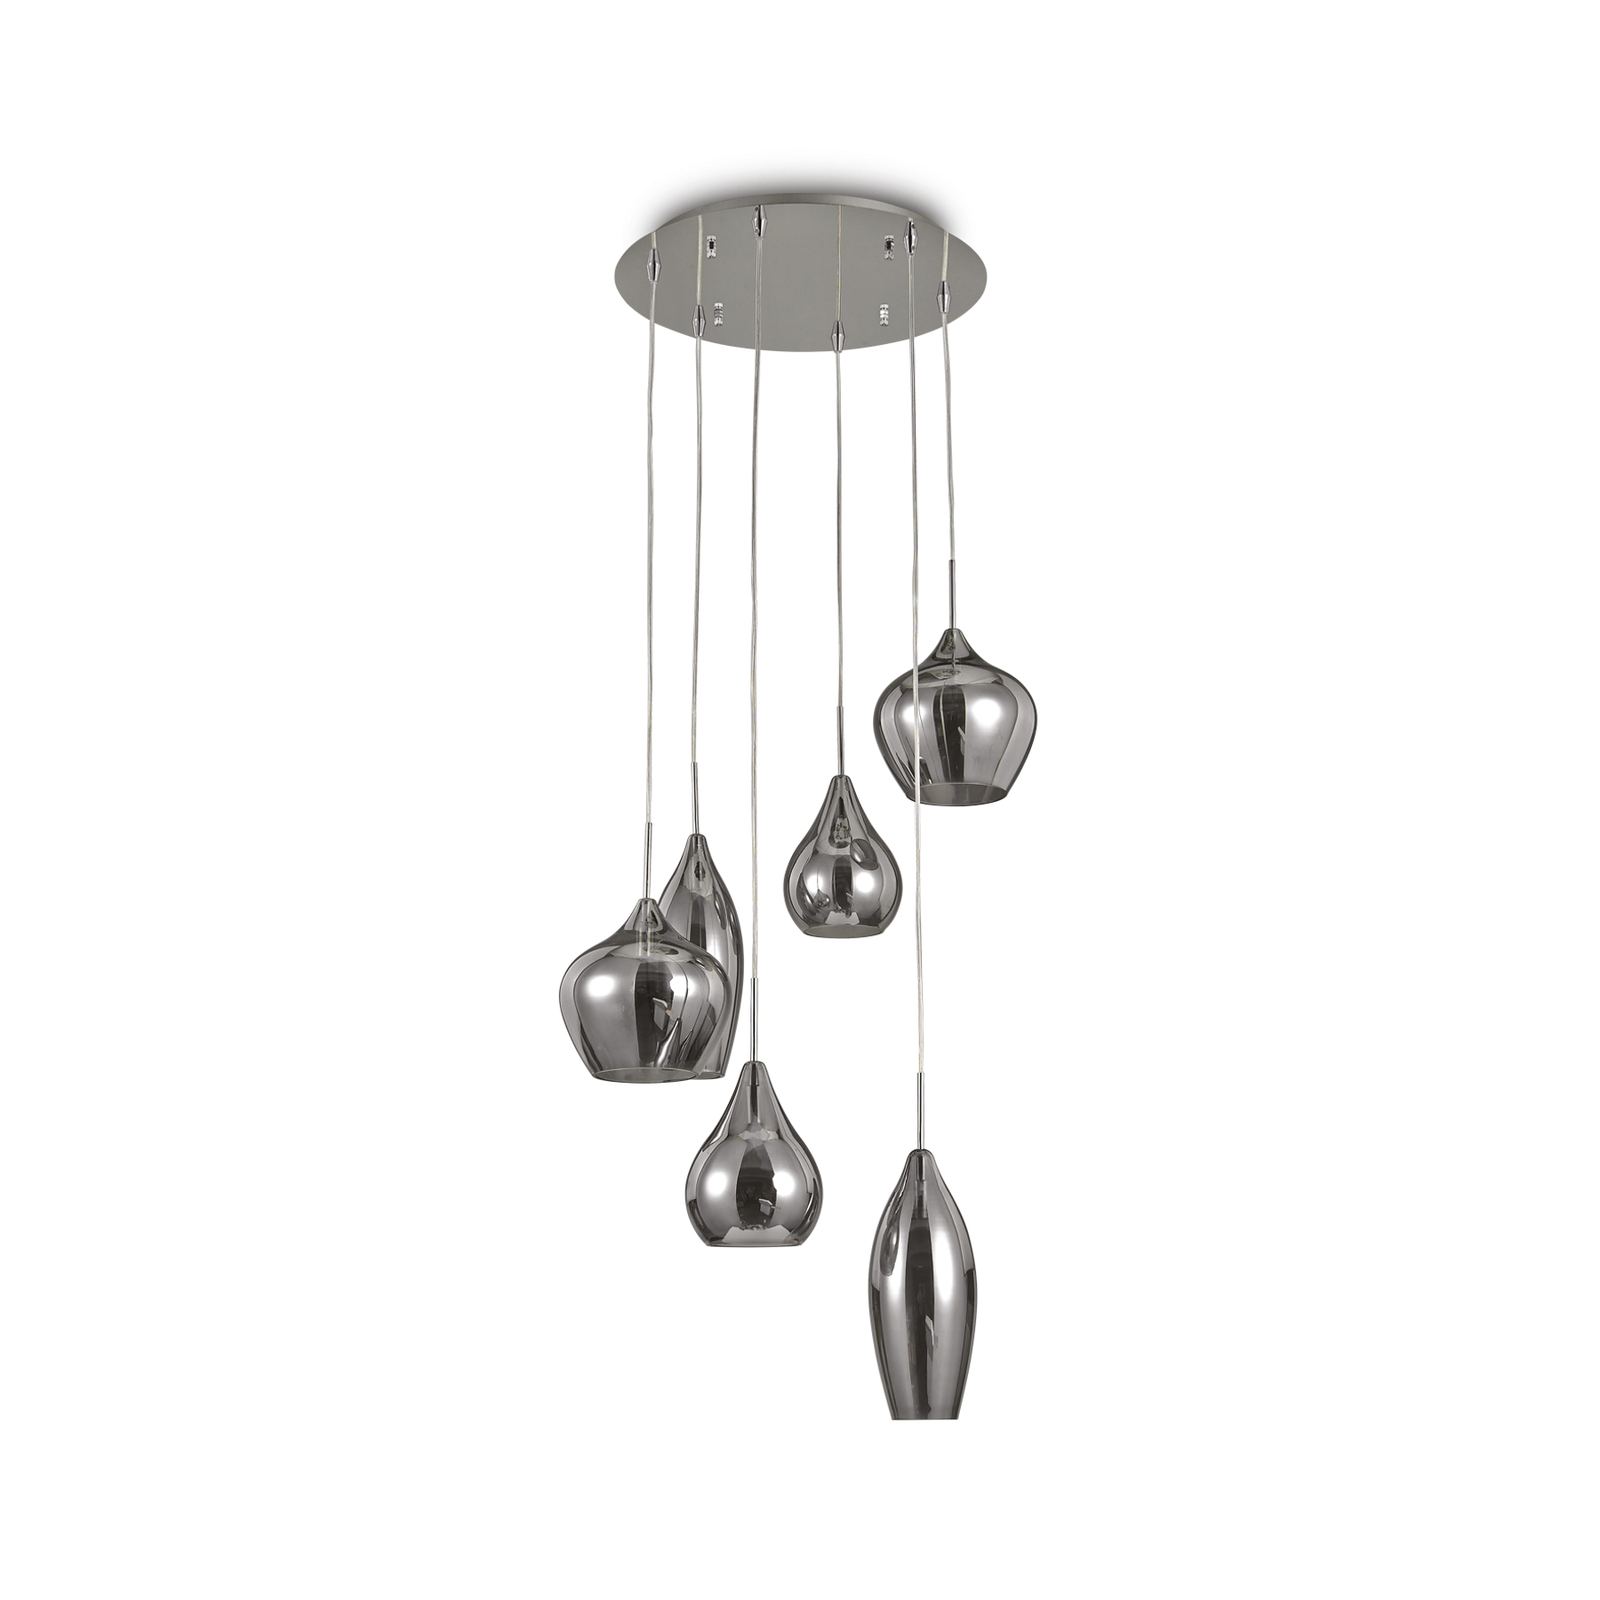 Ideal Lux Soft hanglamp 6-lamps chroom/rook